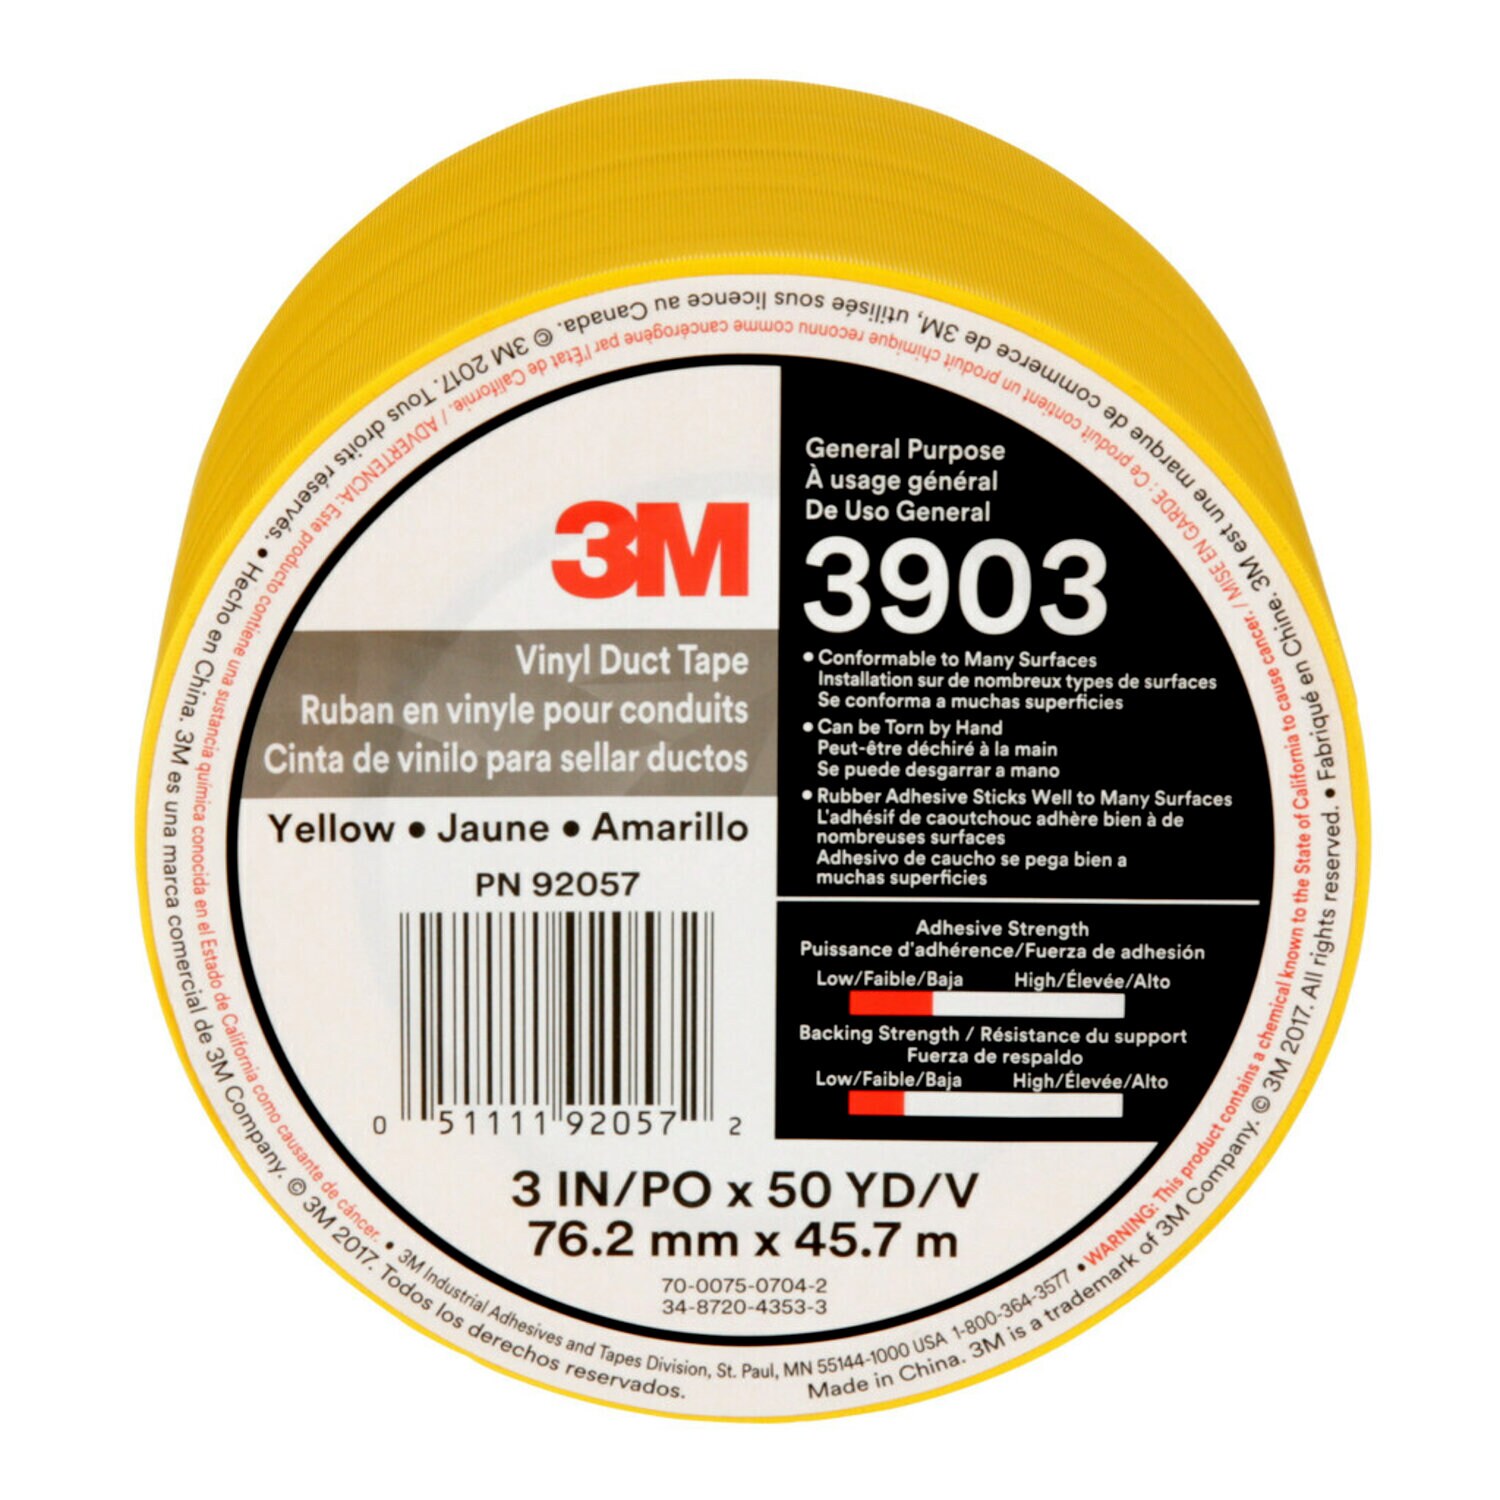 7010378167 - 3M Vinyl Duct Tape 3903, Yellow, 3 in x 50 yd, 6.5 mil, 18/Case,
Individually Wrapped Conveniently Packaged